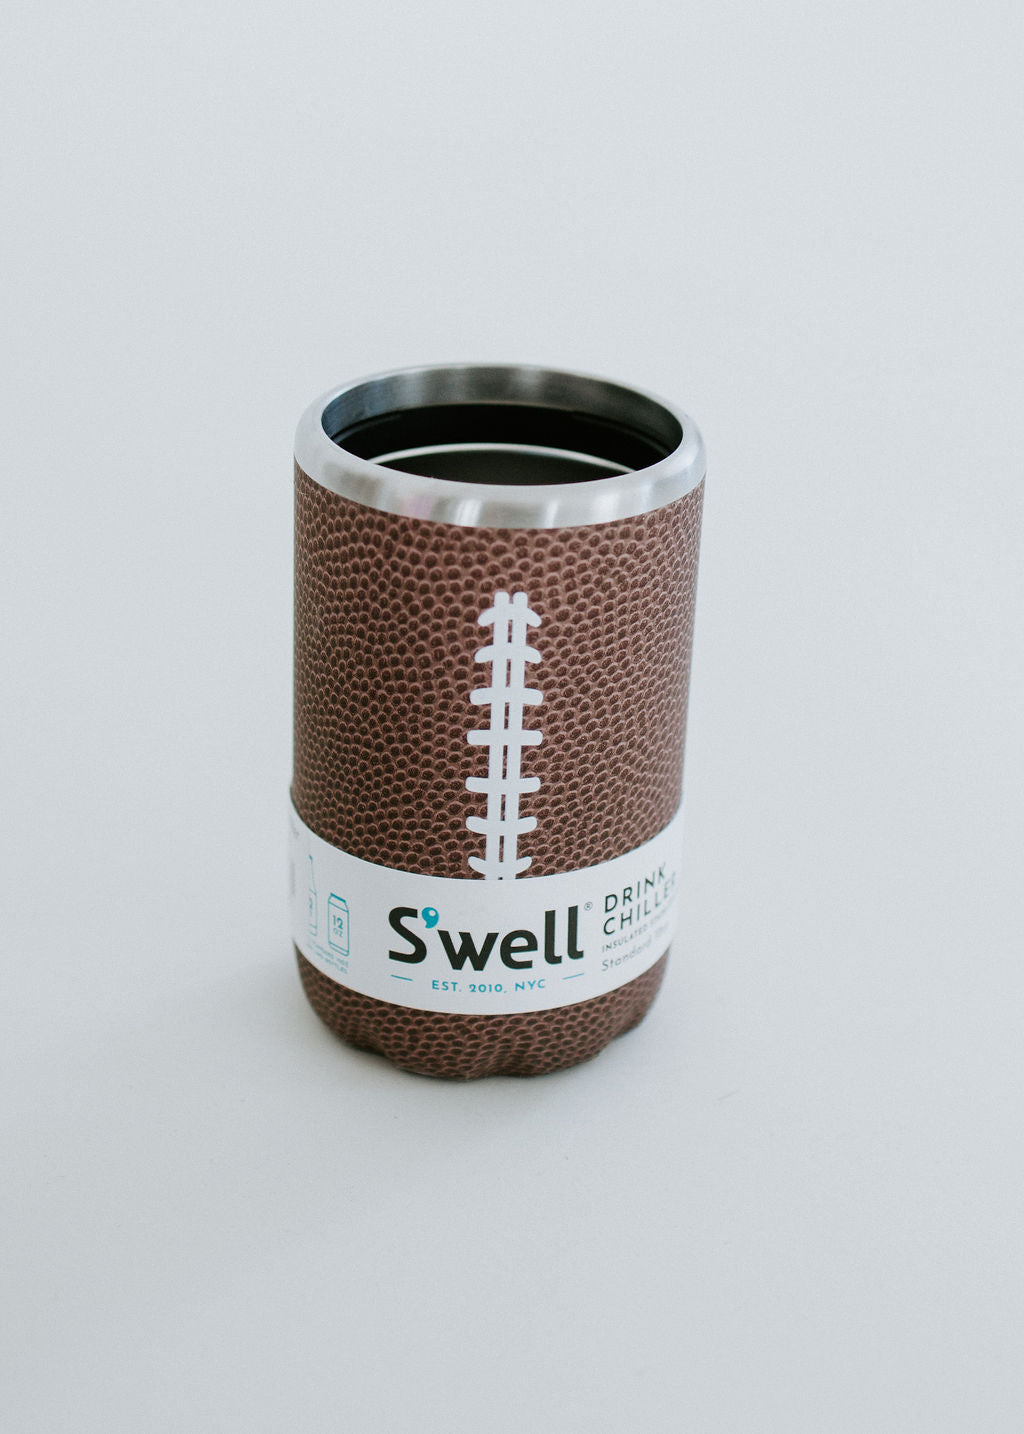 S'well End Zone 12oz Drink Chiller – NFL Alumni Store